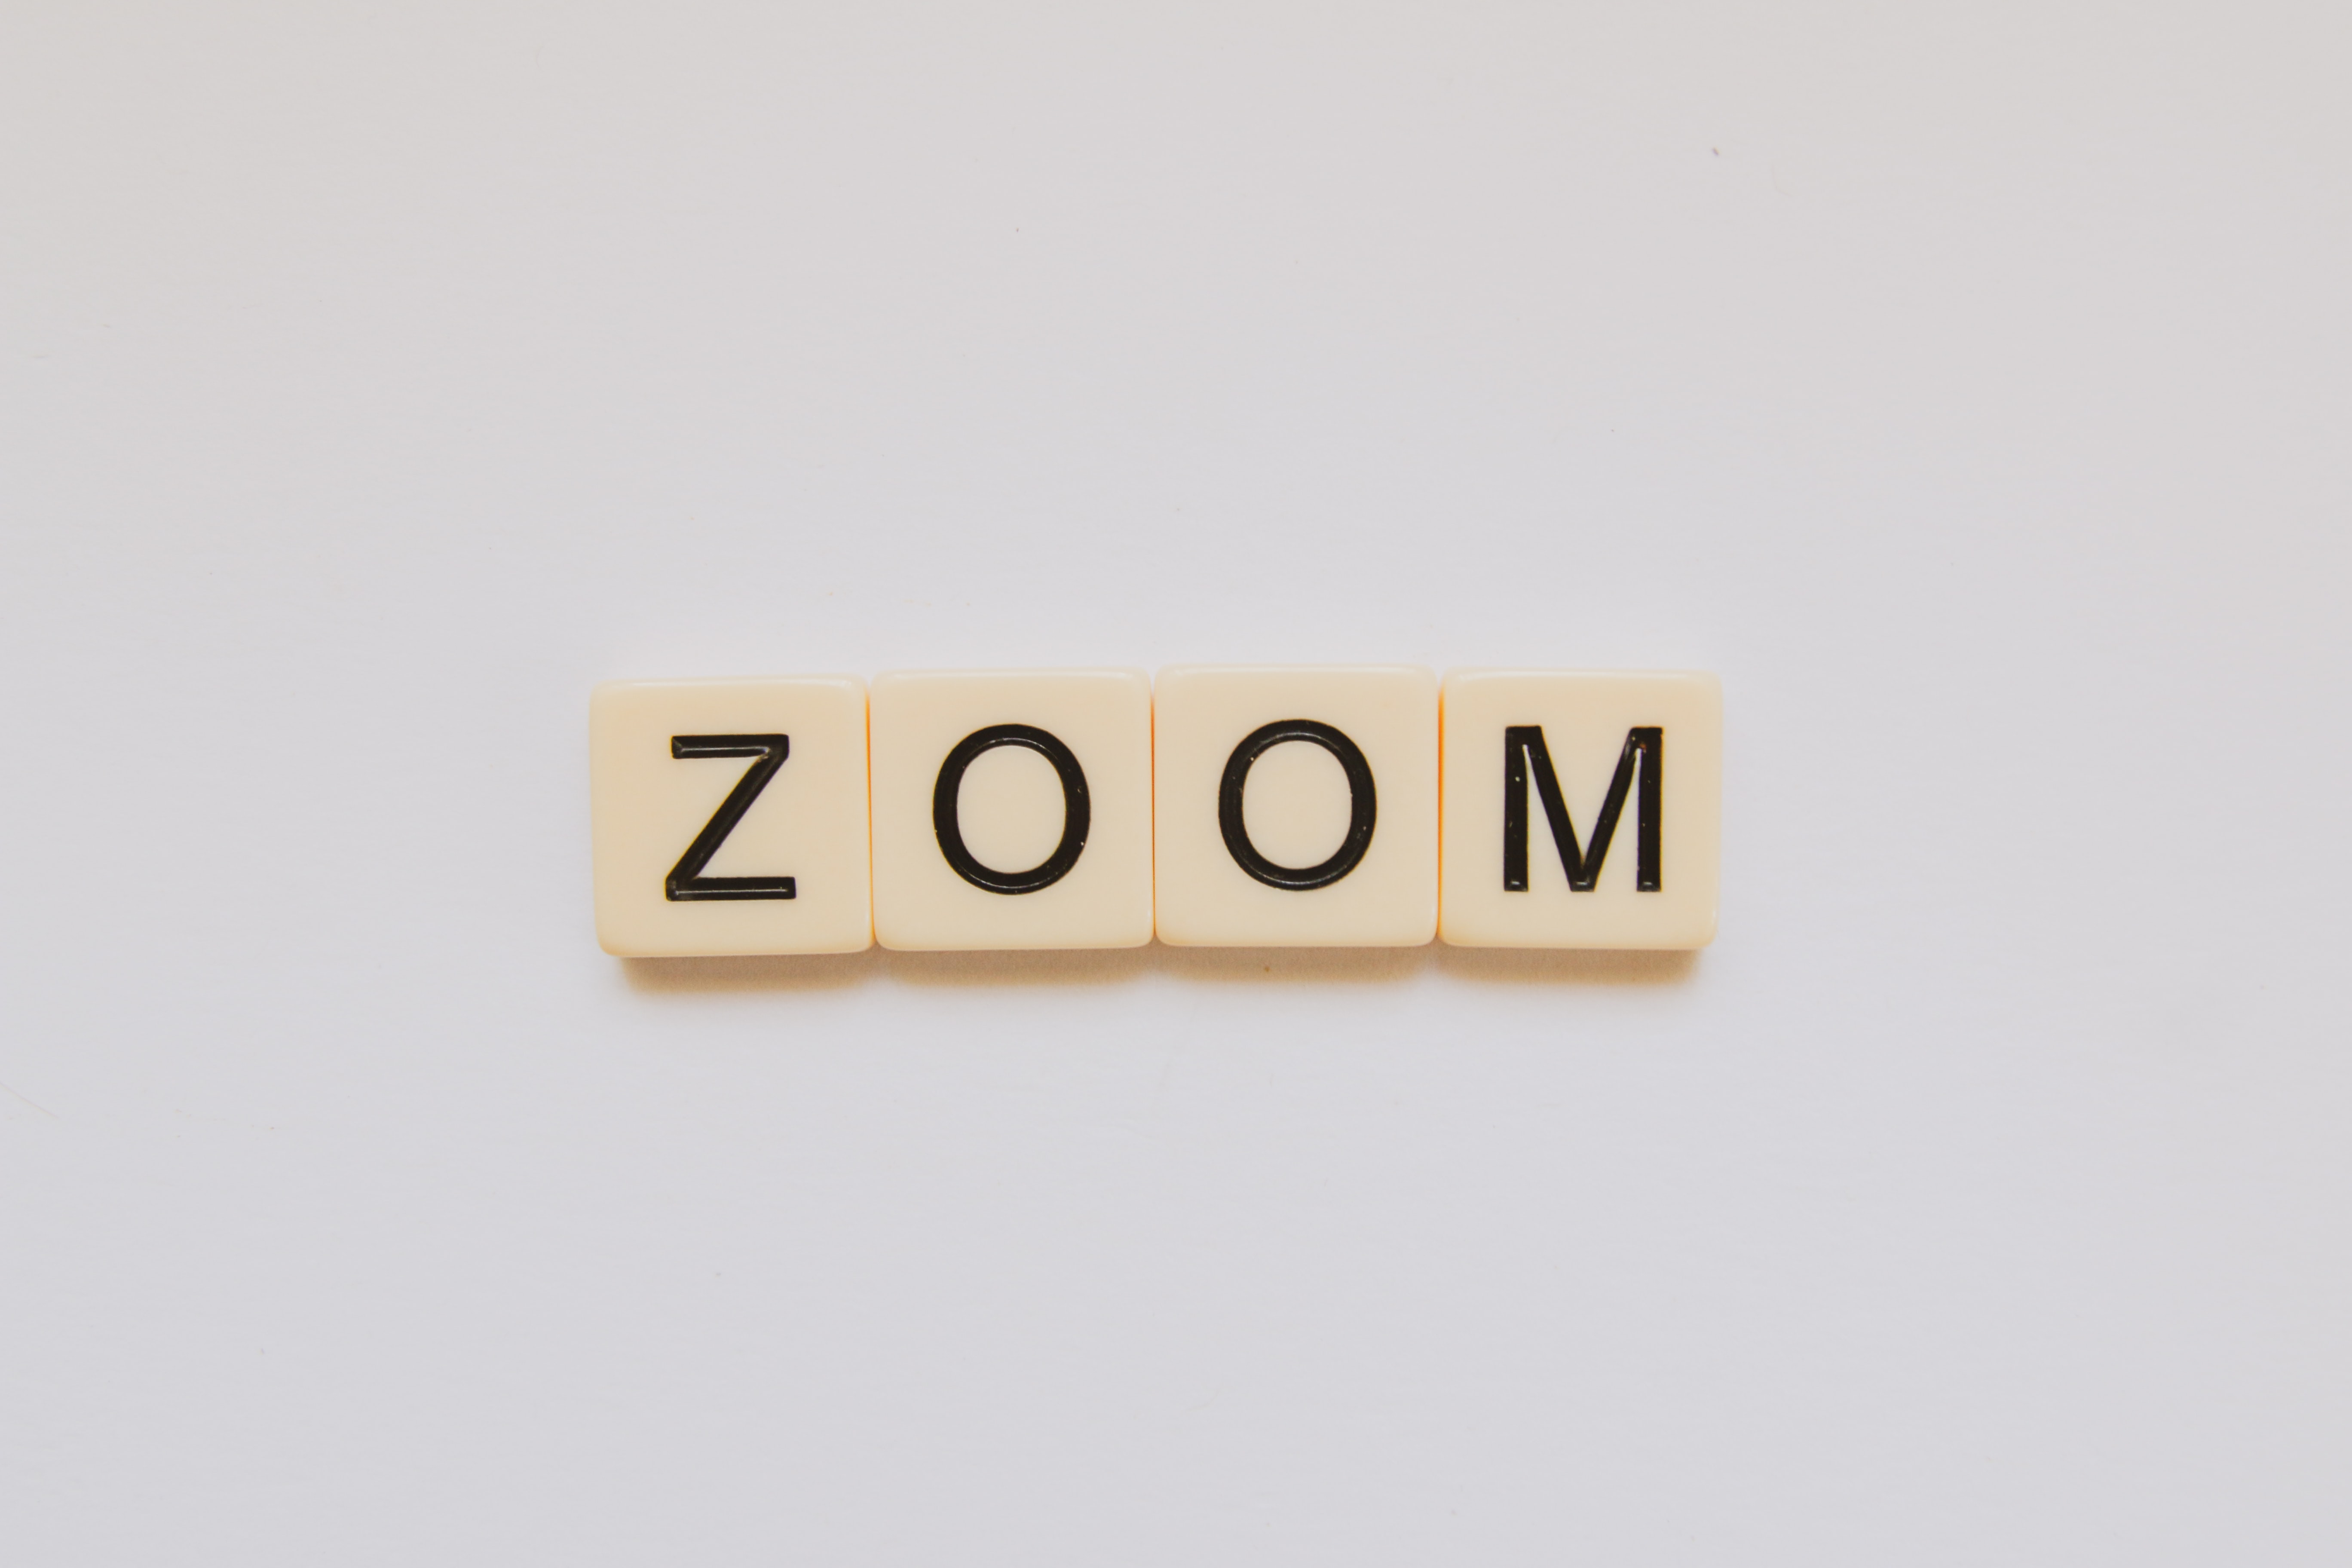 Zoom is Destroying Our Ability to Interact